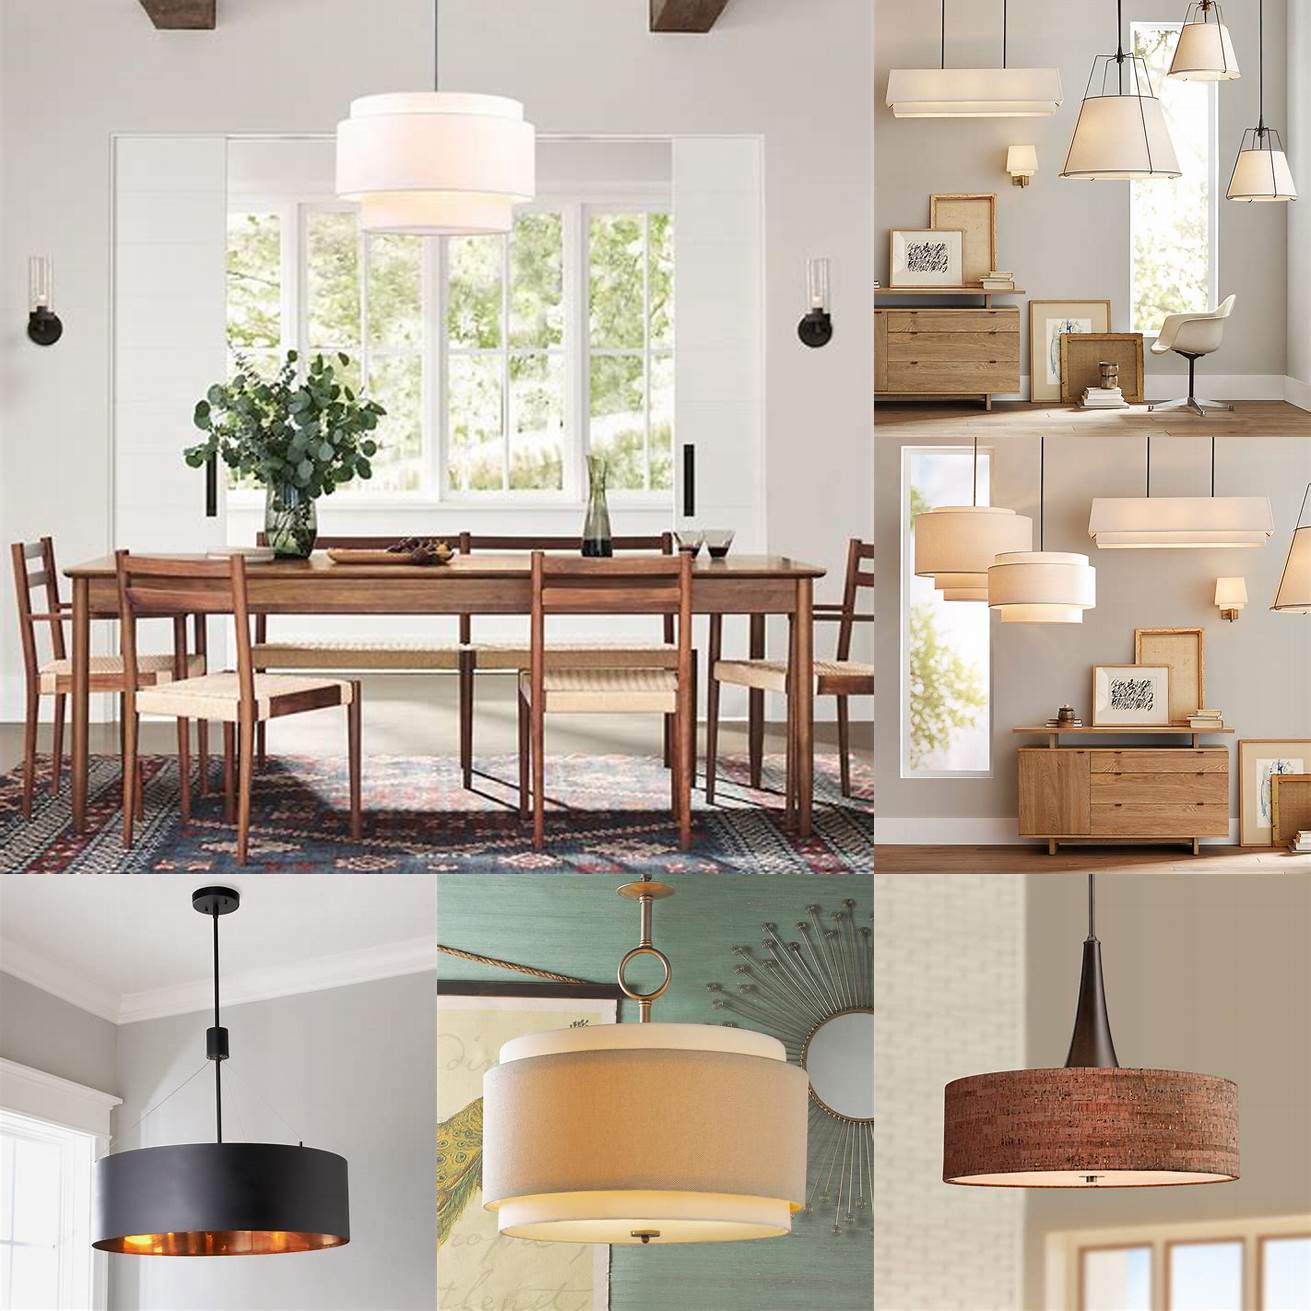 Pair a drum pendant light with other lighting sources for a layered look